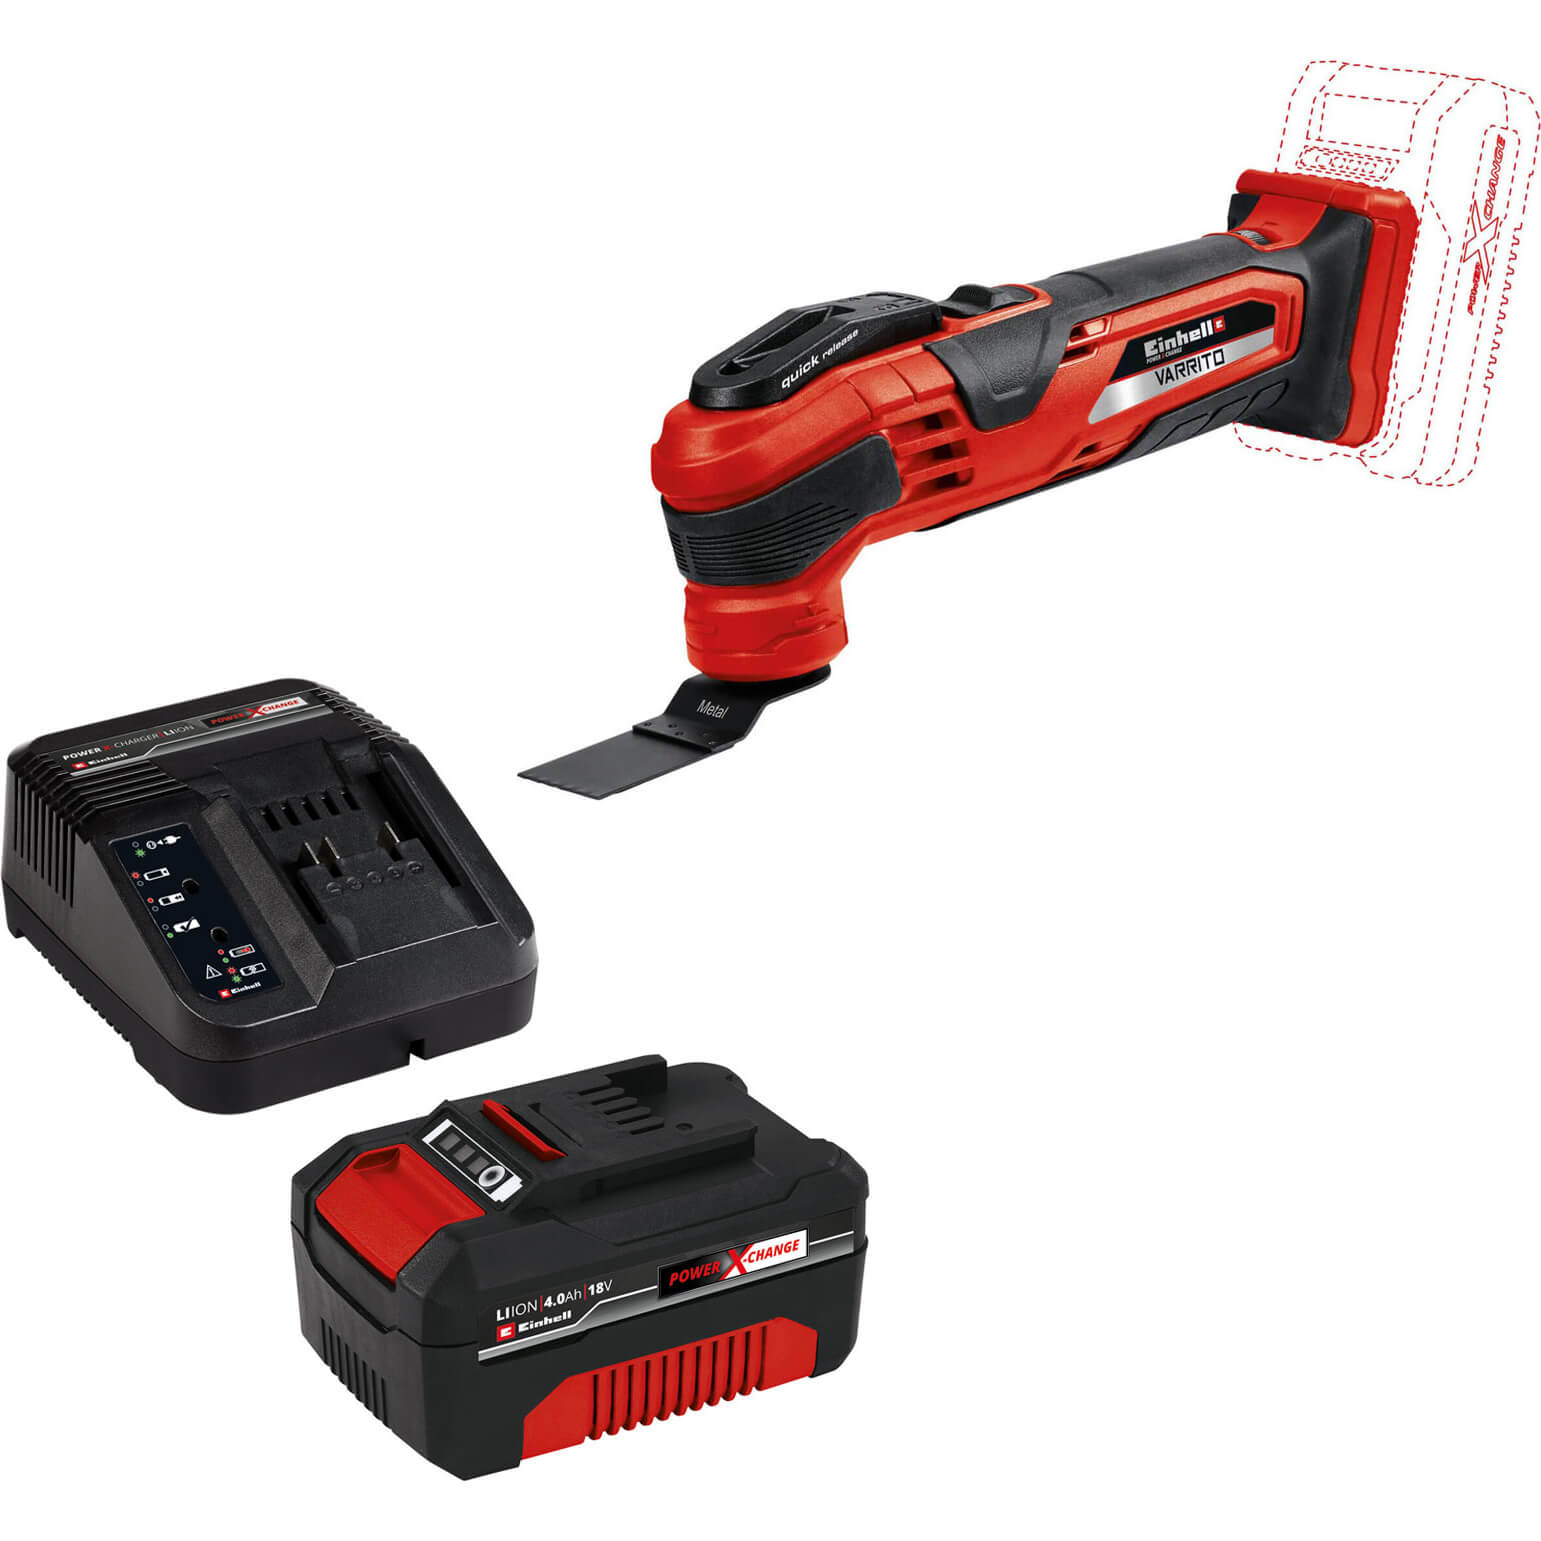 Image of Einhell VARRITO 18v Cordless Oscillating Multi Tool 1 x 4ah Li-ion Charger No Case